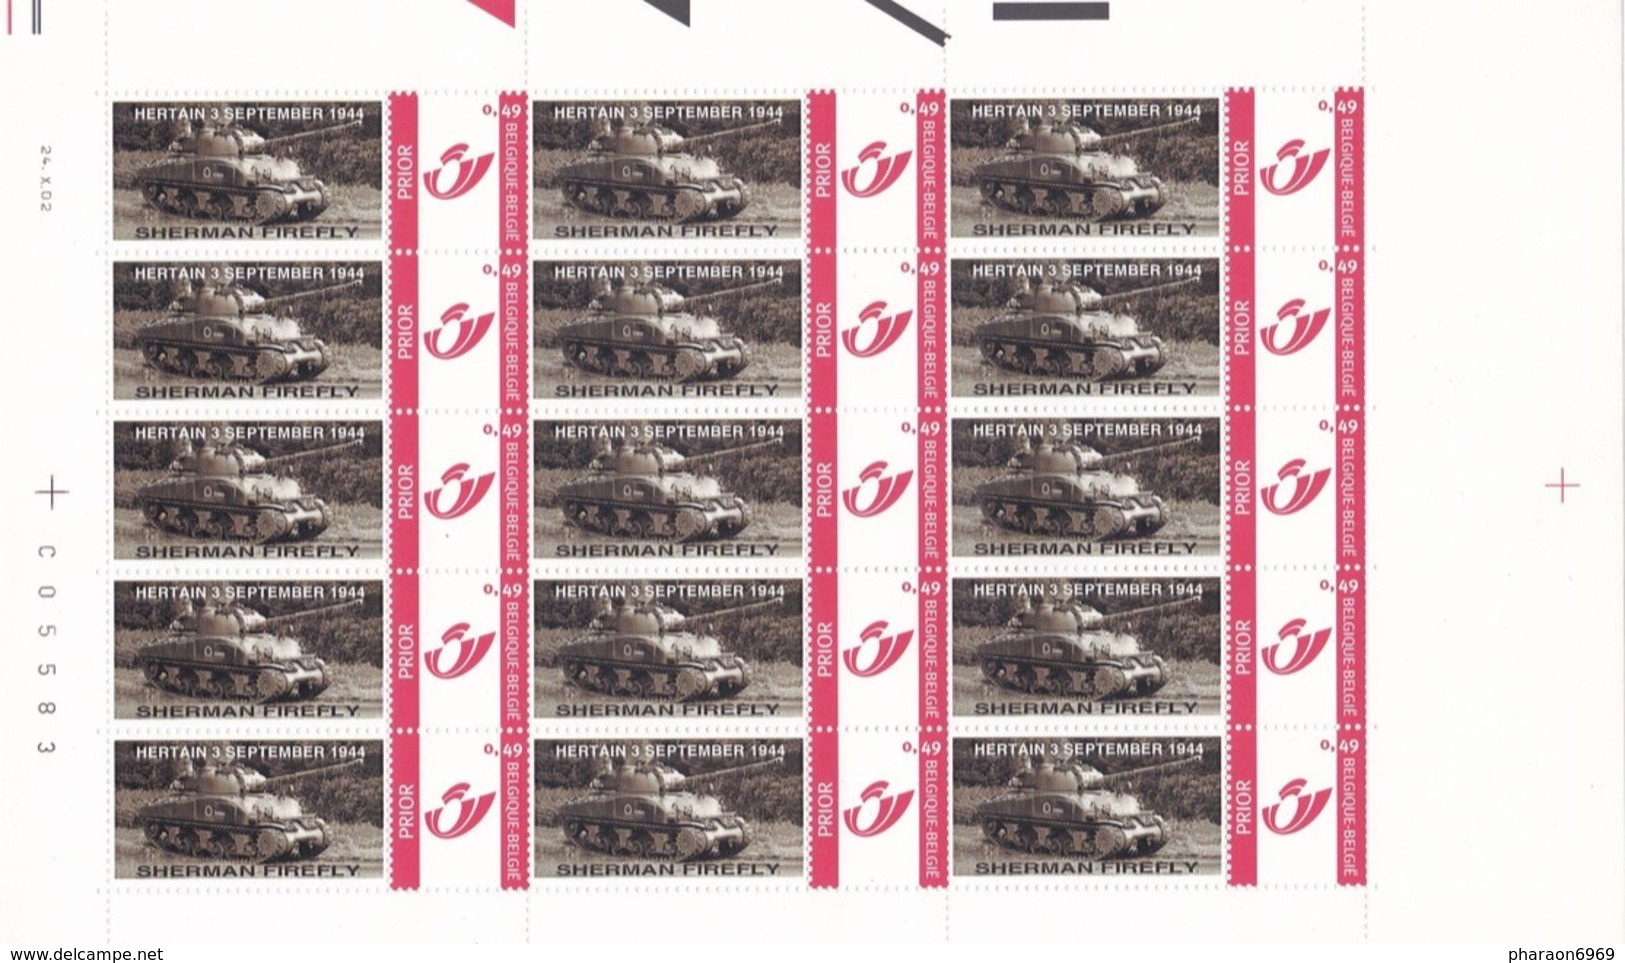 Duostamps Duostamp Char Tank Sherman Firefly Hertain 3 September 1944 - Mint